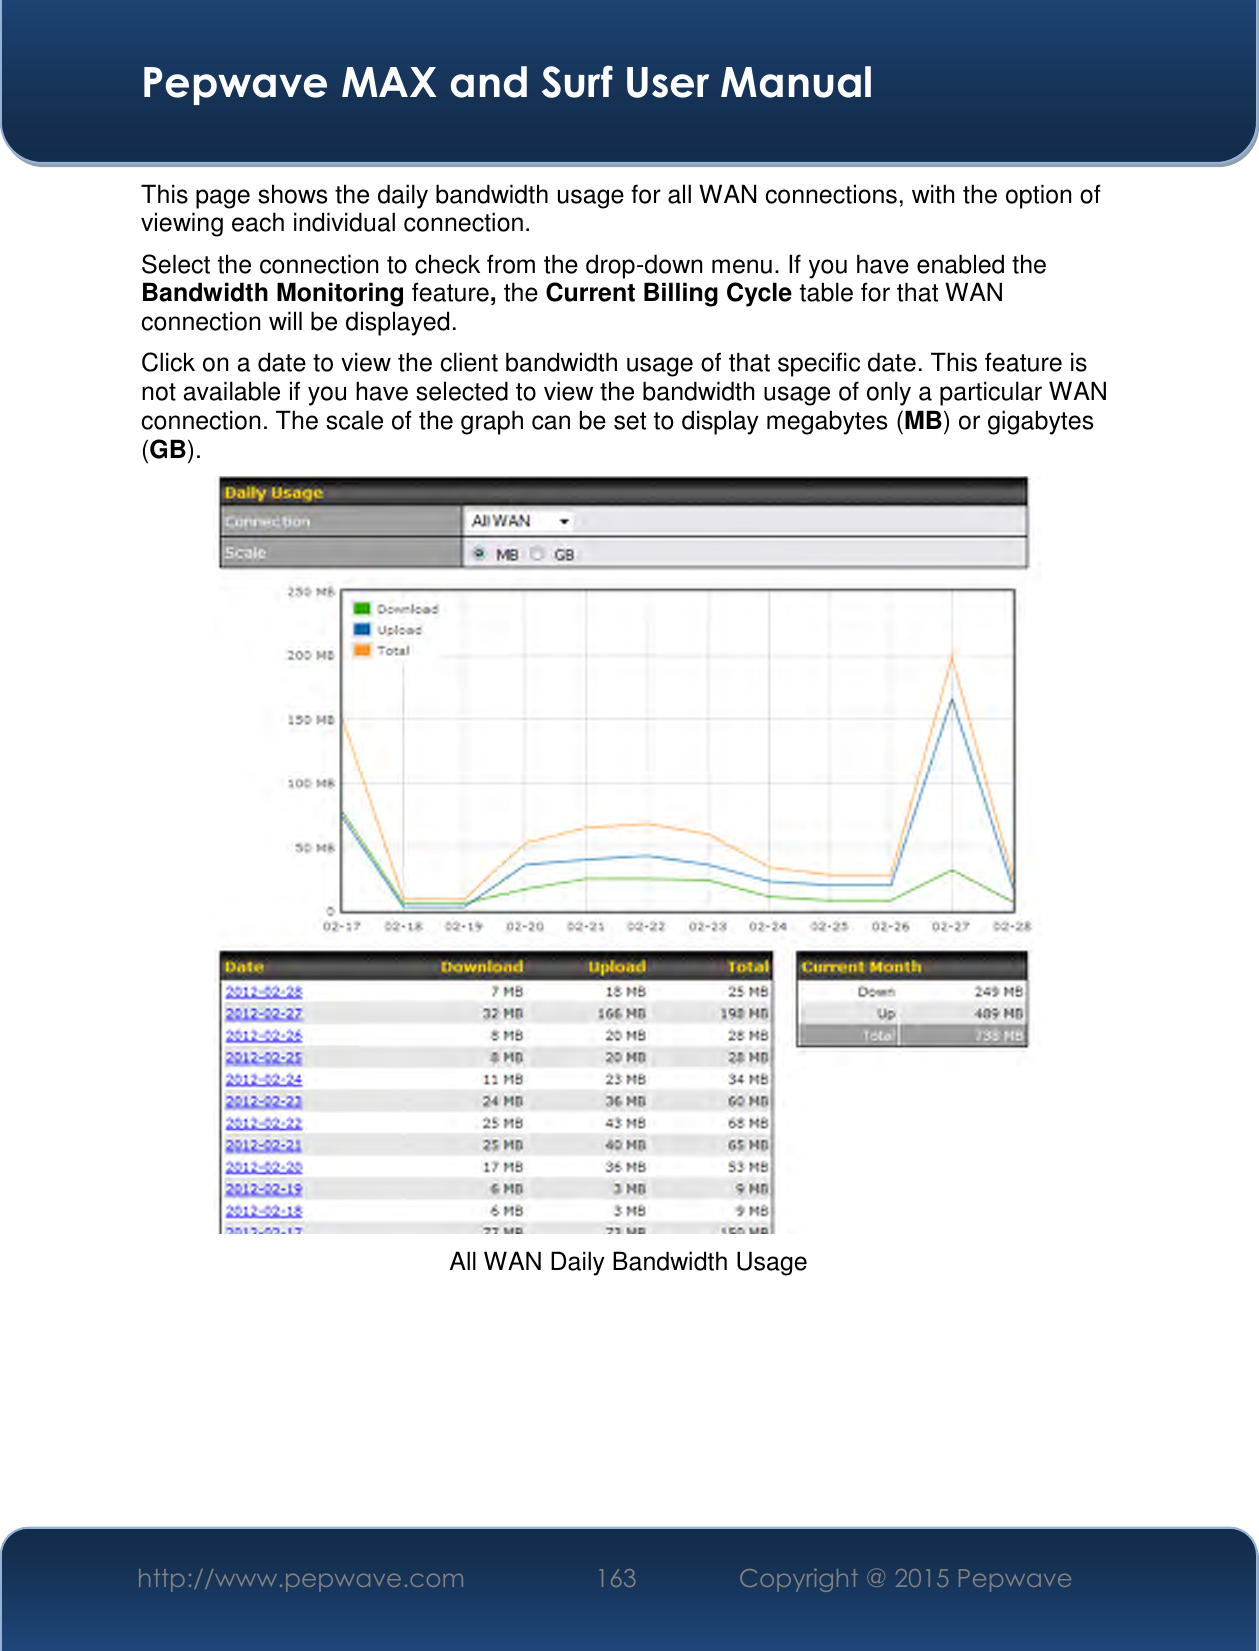  Pepwave MAX and Surf User Manual http://www.pepwave.com 163   Copyright @ 2015 Pepwave   This page shows the daily bandwidth usage for all WAN connections, with the option of viewing each individual connection.  Select the connection to check from the drop-down menu. If you have enabled the Bandwidth Monitoring feature, the Current Billing Cycle table for that WAN connection will be displayed. Click on a date to view the client bandwidth usage of that specific date. This feature is not available if you have selected to view the bandwidth usage of only a particular WAN connection. The scale of the graph can be set to display megabytes (MB) or gigabytes (GB).  All WAN Daily Bandwidth Usage    